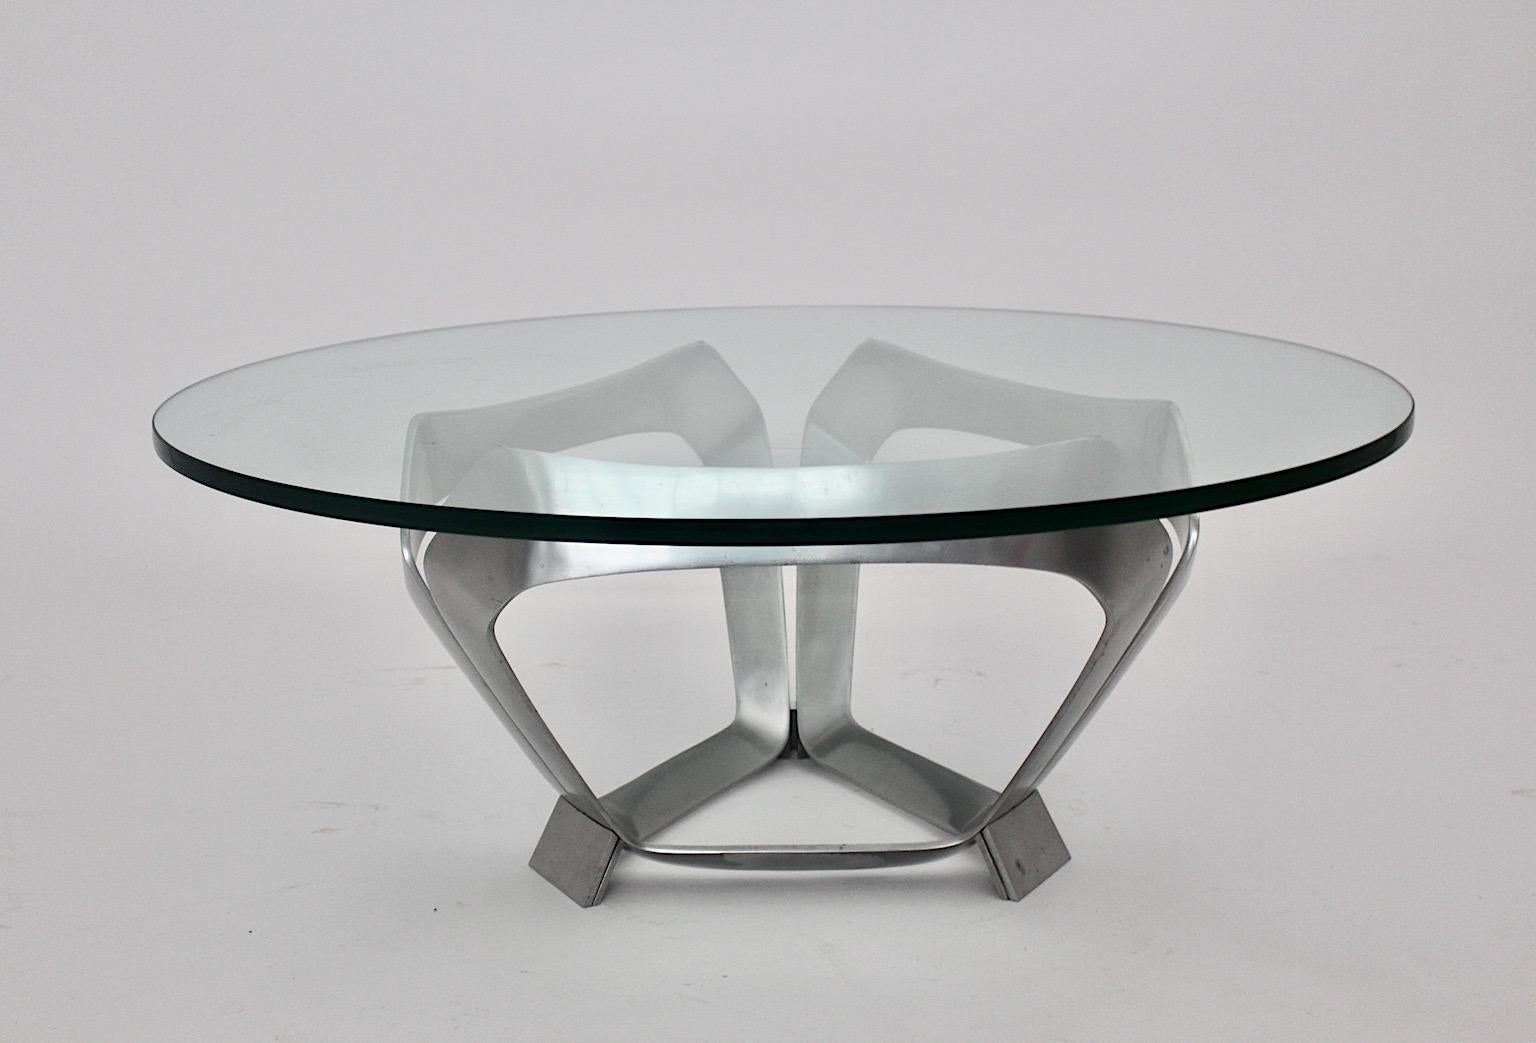 Aluminum Glass Space Age Vintage Coffee Table by Knut Hesterberg 1960s Germany For Sale 3